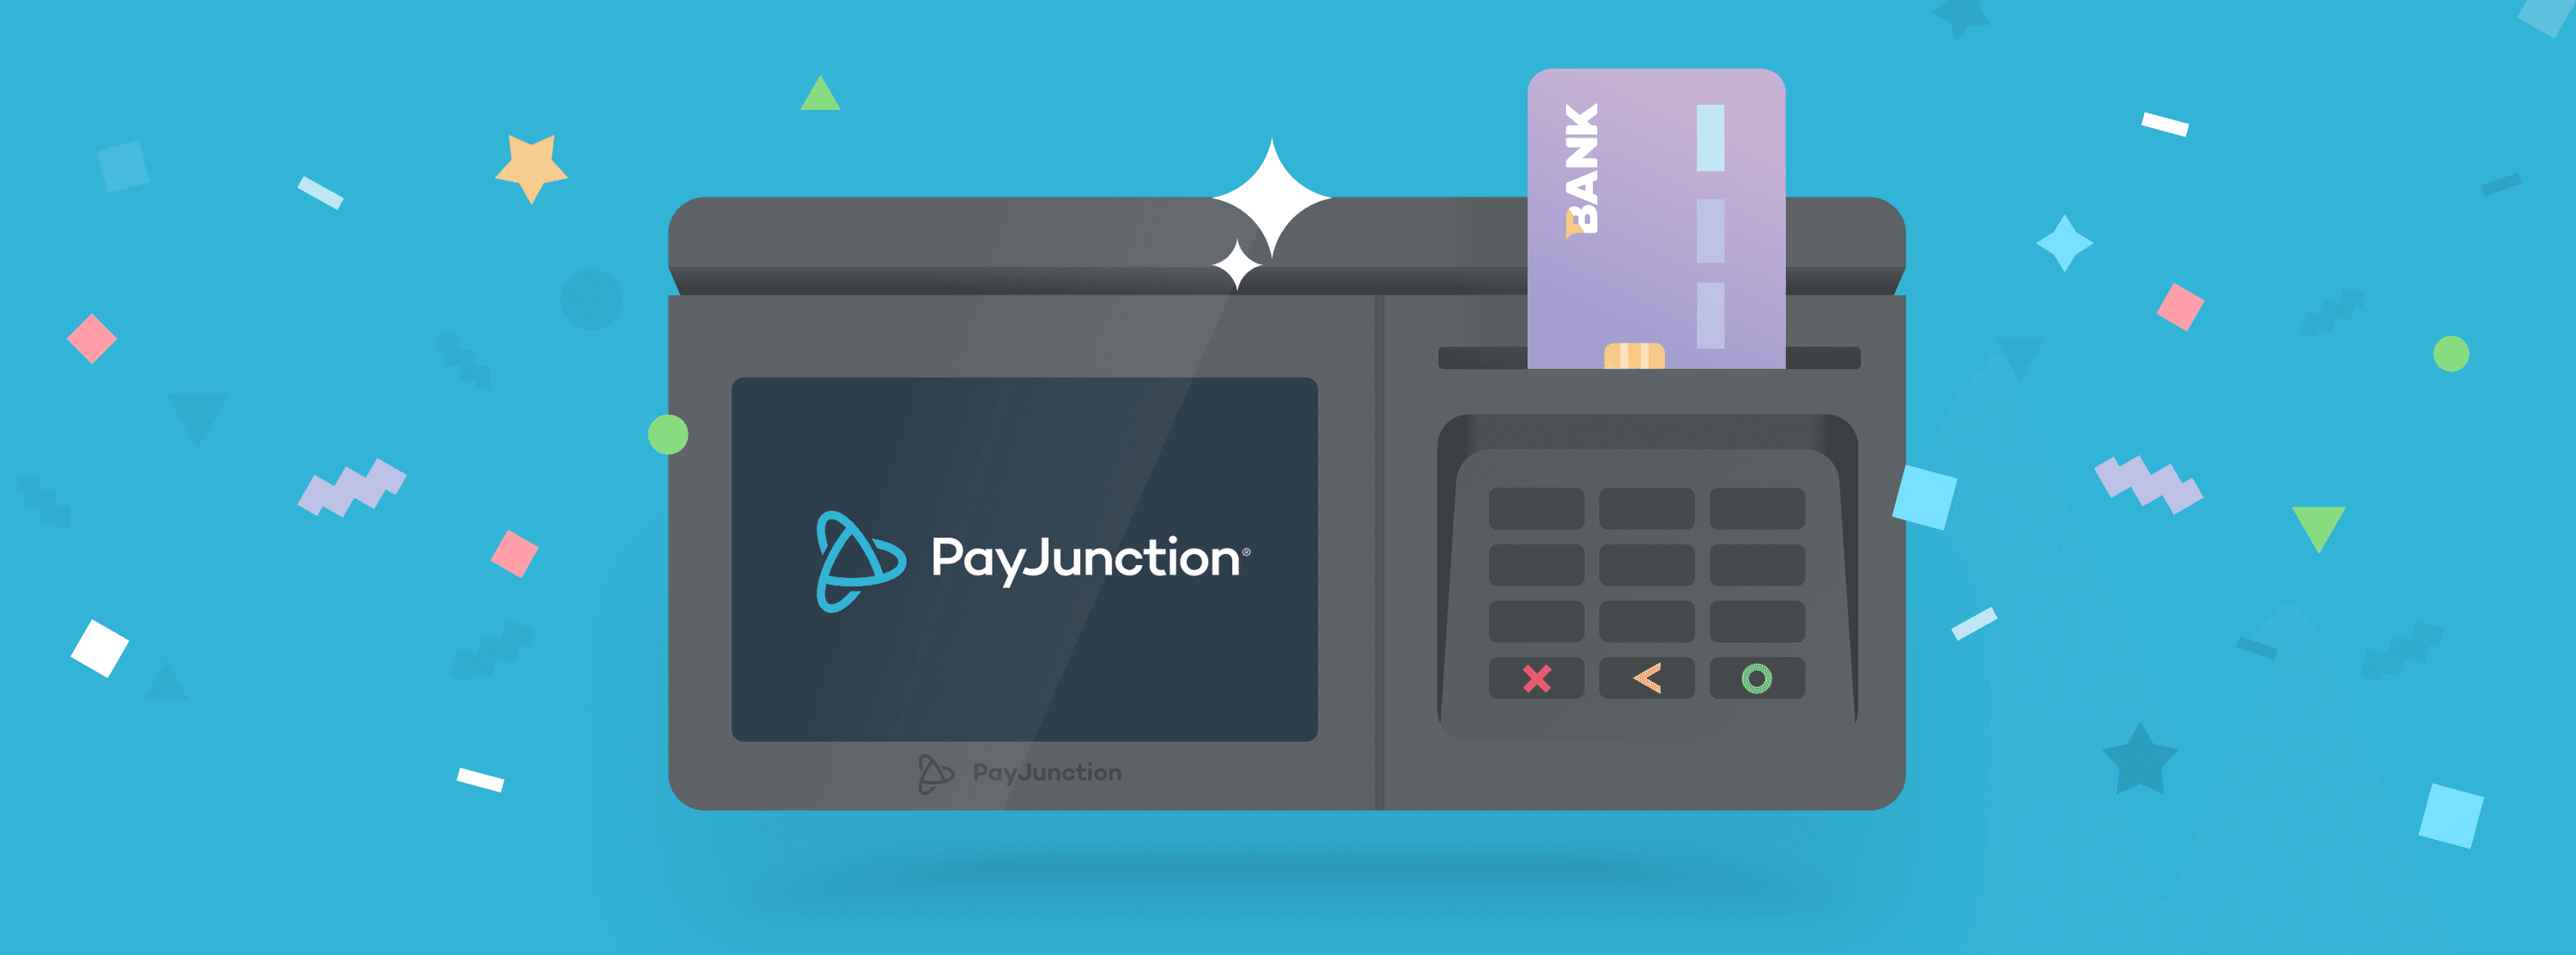 PayJunction terminals and payments